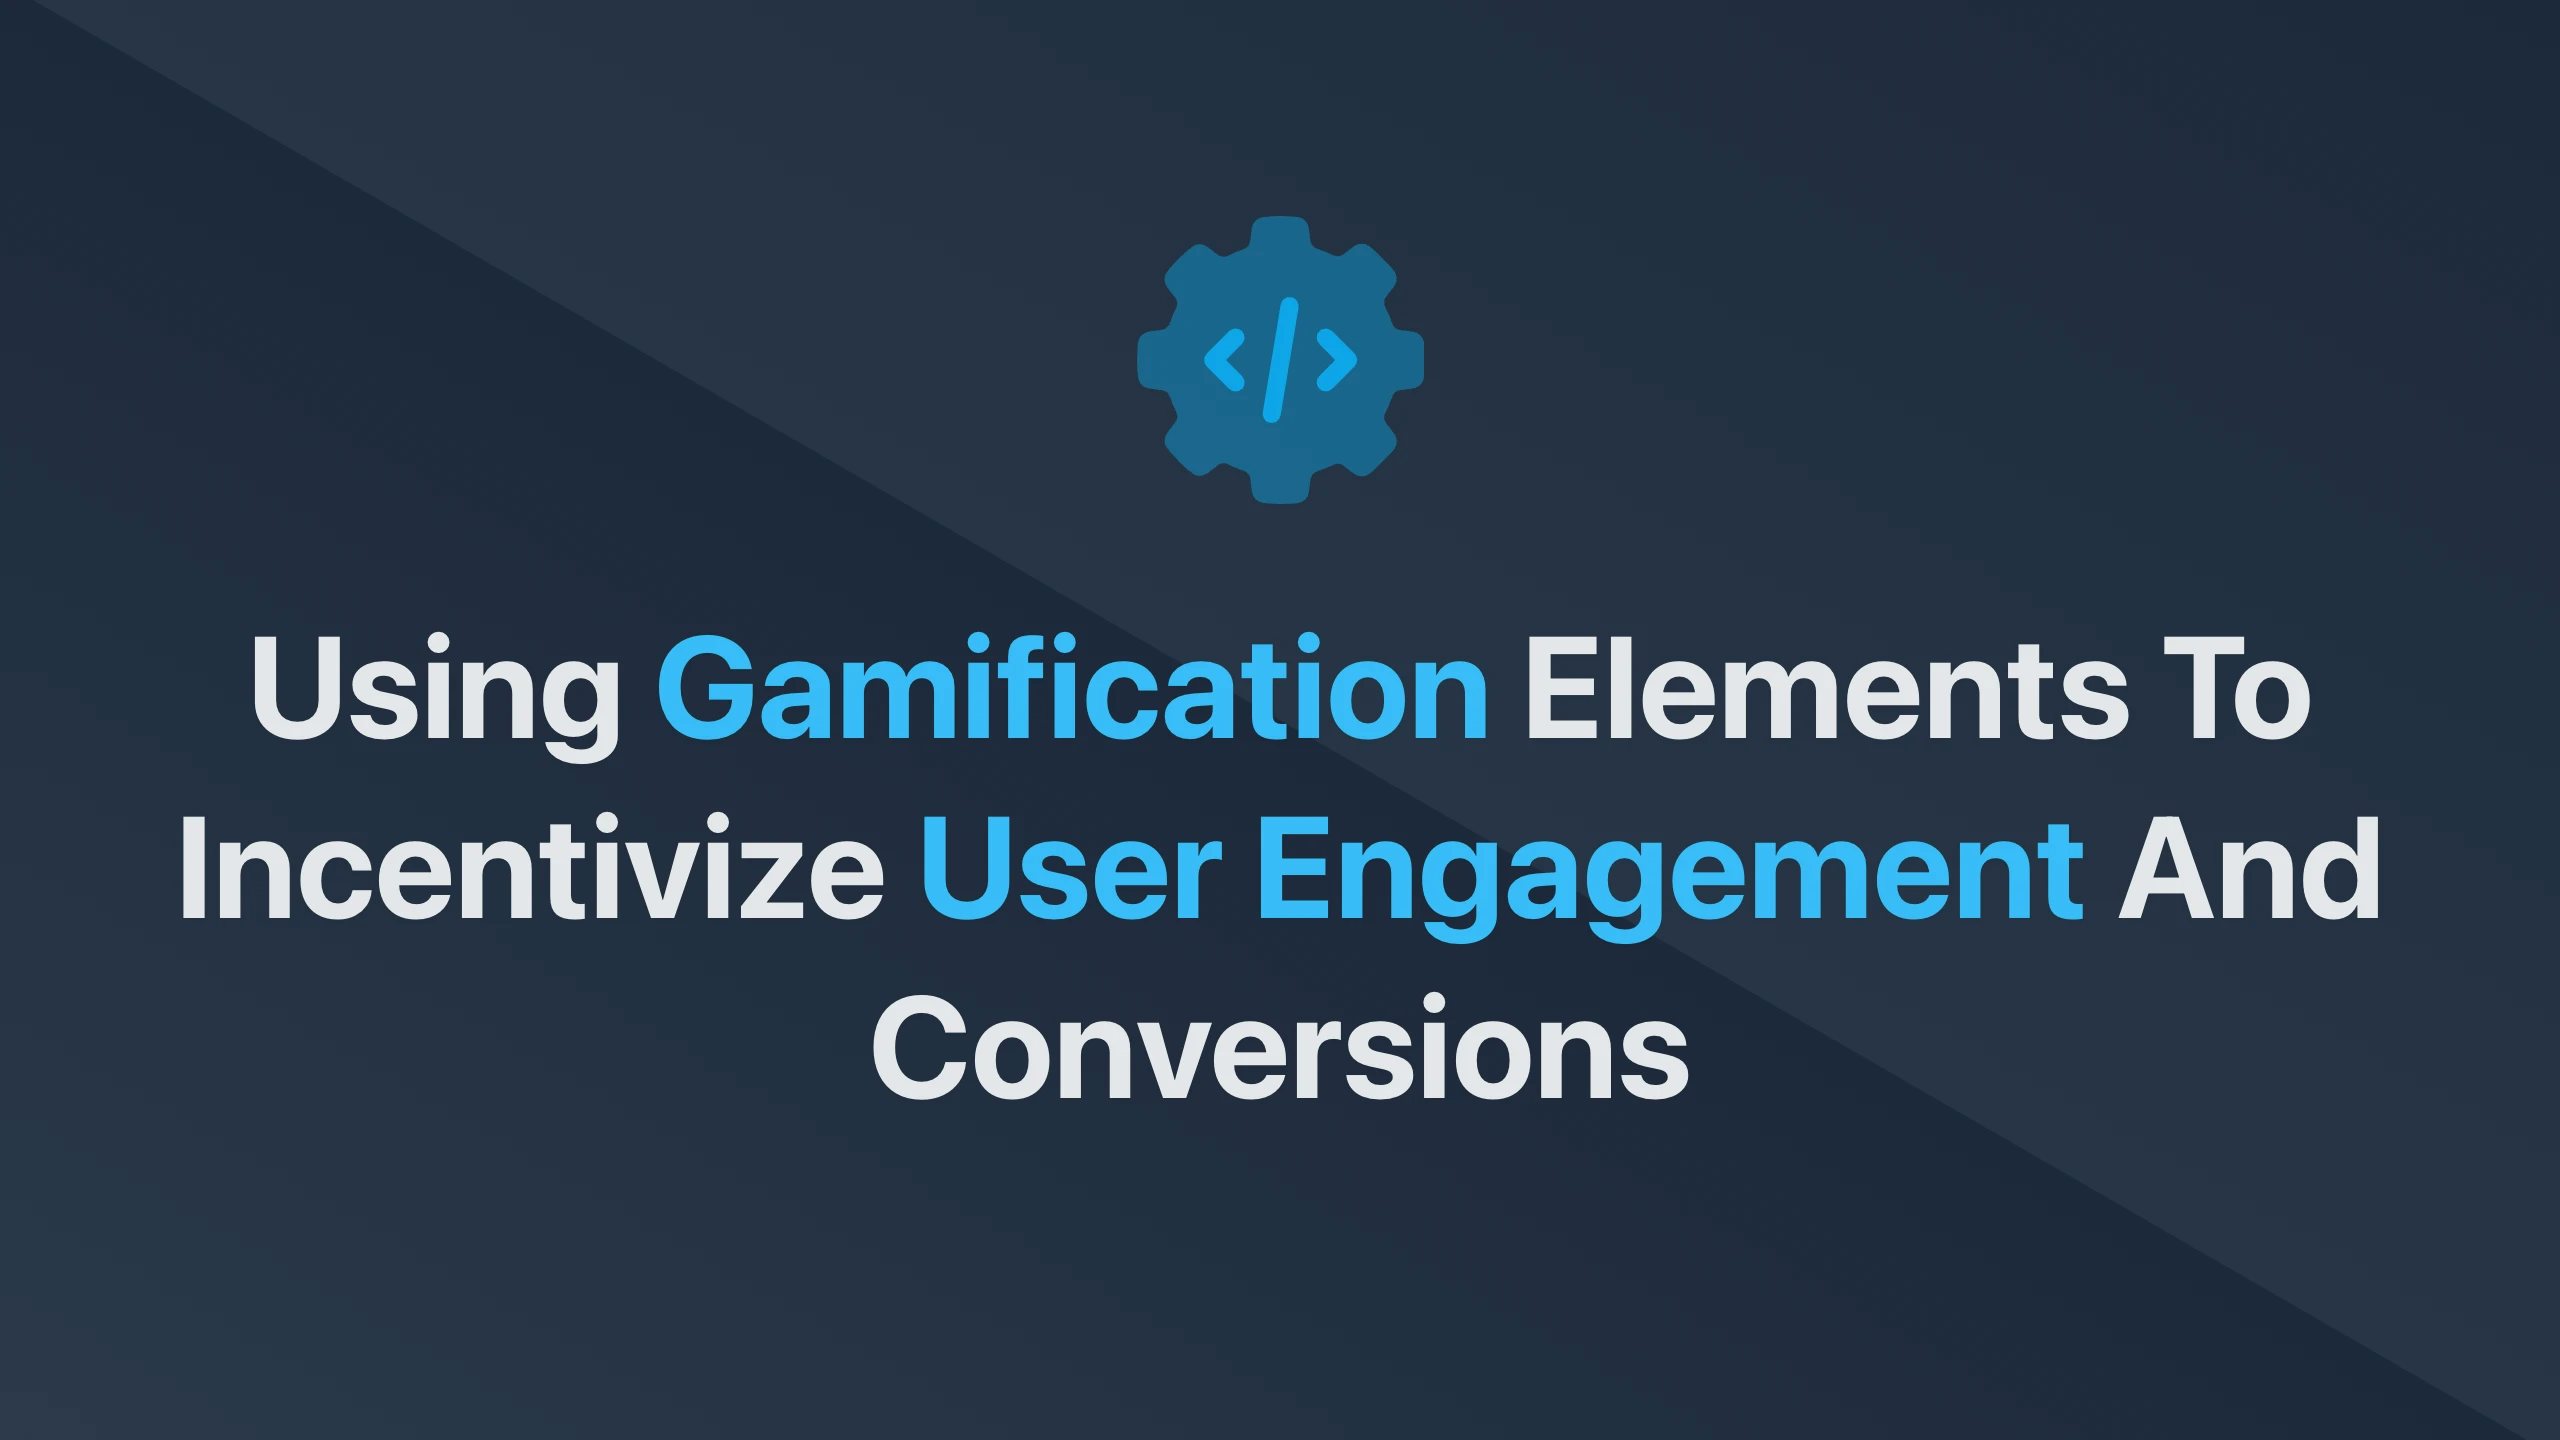 Cover Image for Using Gamification Elements to Incentivize User Engagement and Conversions